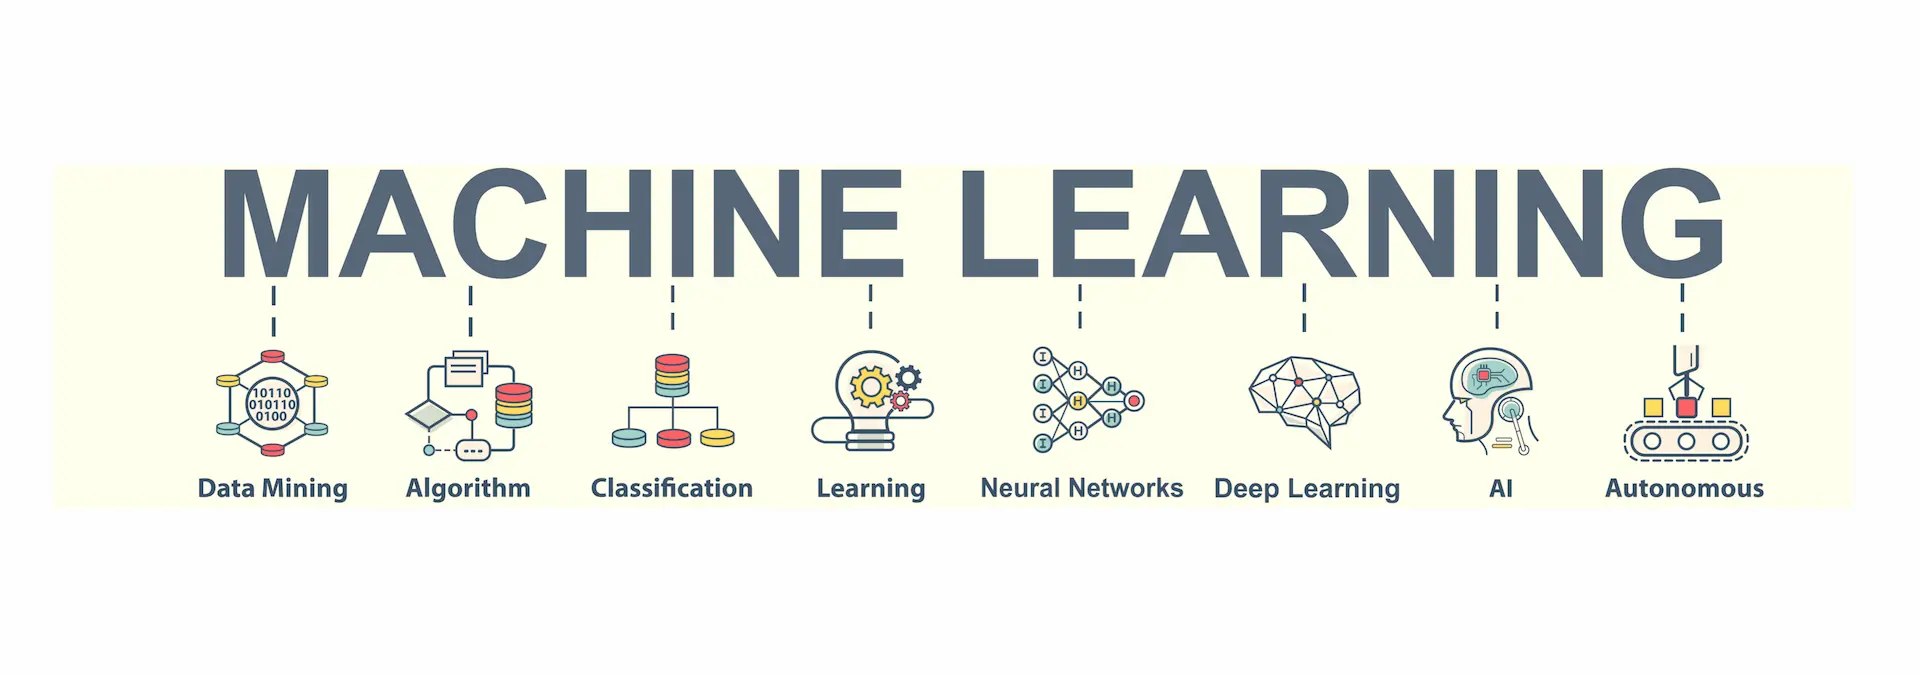 Top 13 Classification Machine Learning Datasets and Projects